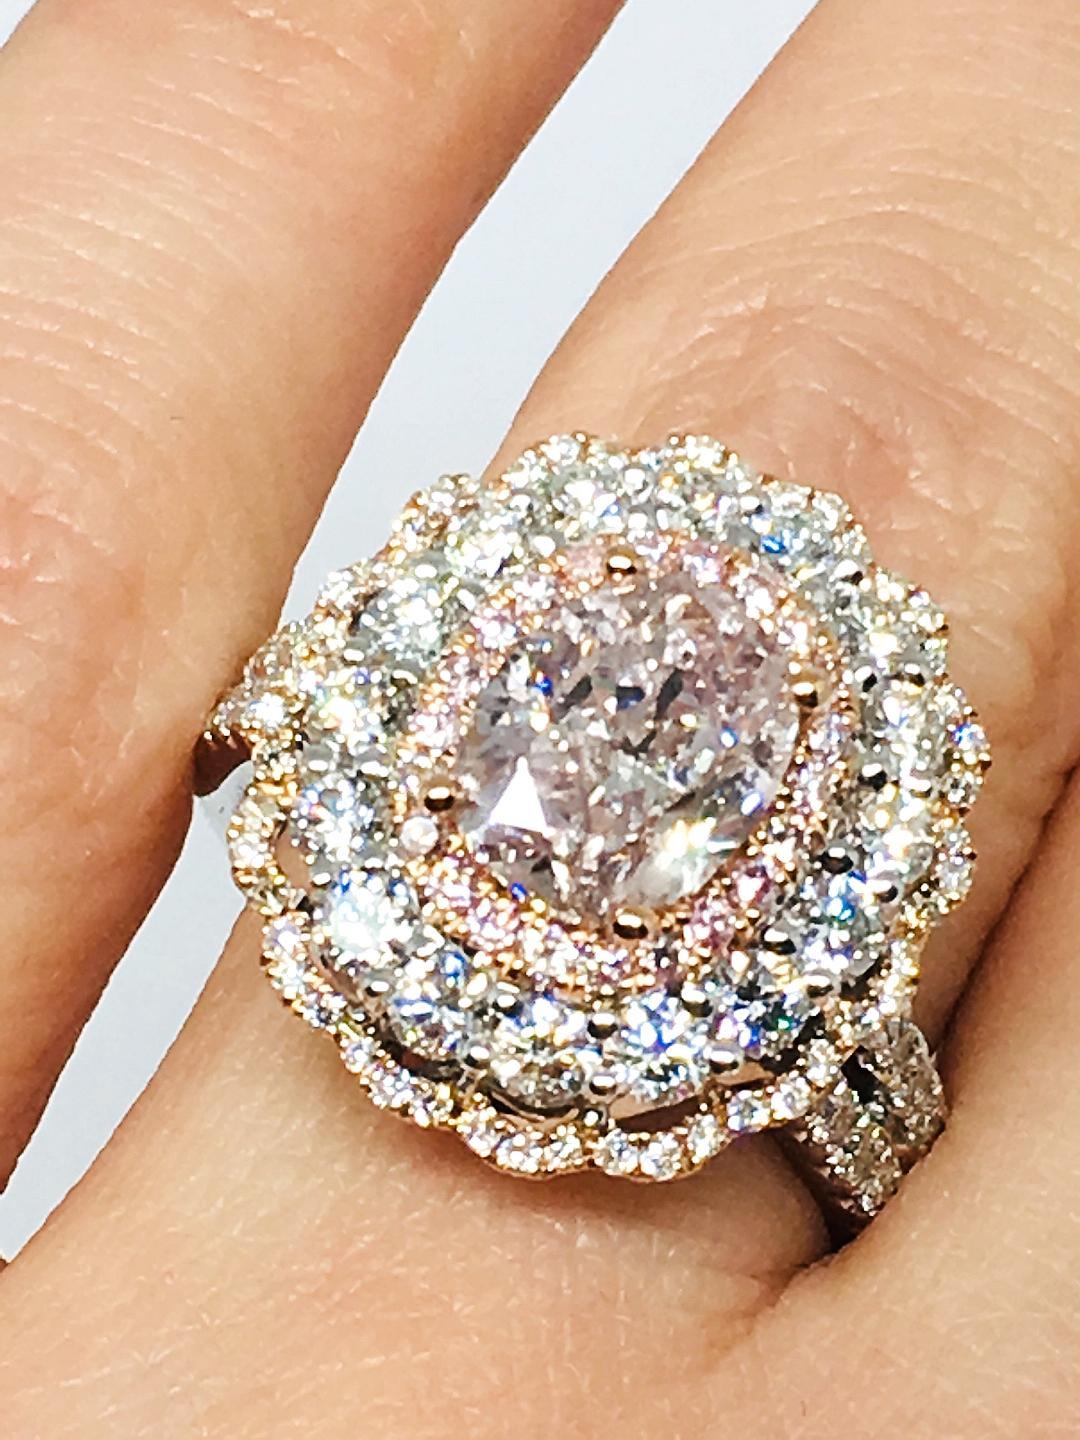 We introduce you another piece of art with this astonishing GIA CERTIFIED FANCY BROWNISH PINK DIAMOND , with a triple halo of pink and white diamonds .
METAL: White Gold , Rose Gold
METAL PURITY: 18k
Center Diamond : GIA PINK DIAMOND 1.87 TCW 
Pink